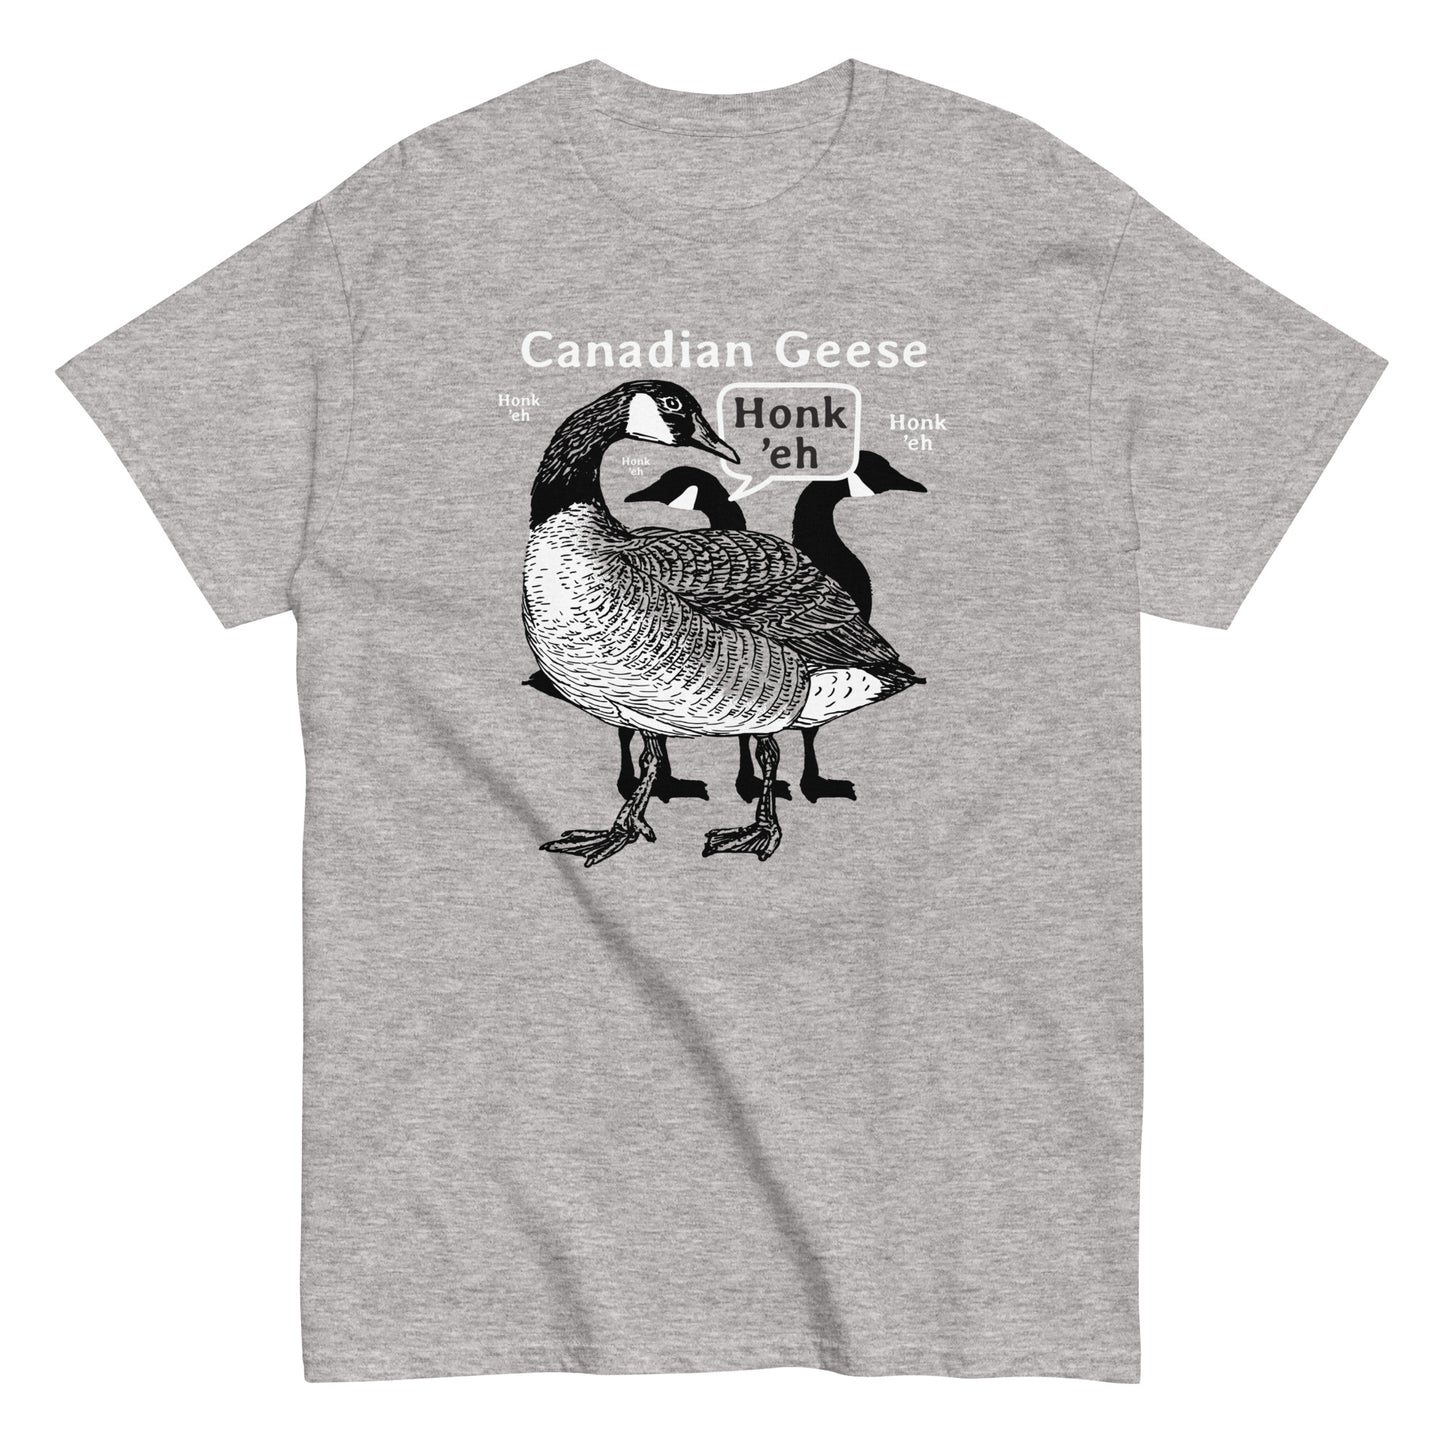 Canadian Geese Men's Classic Tee